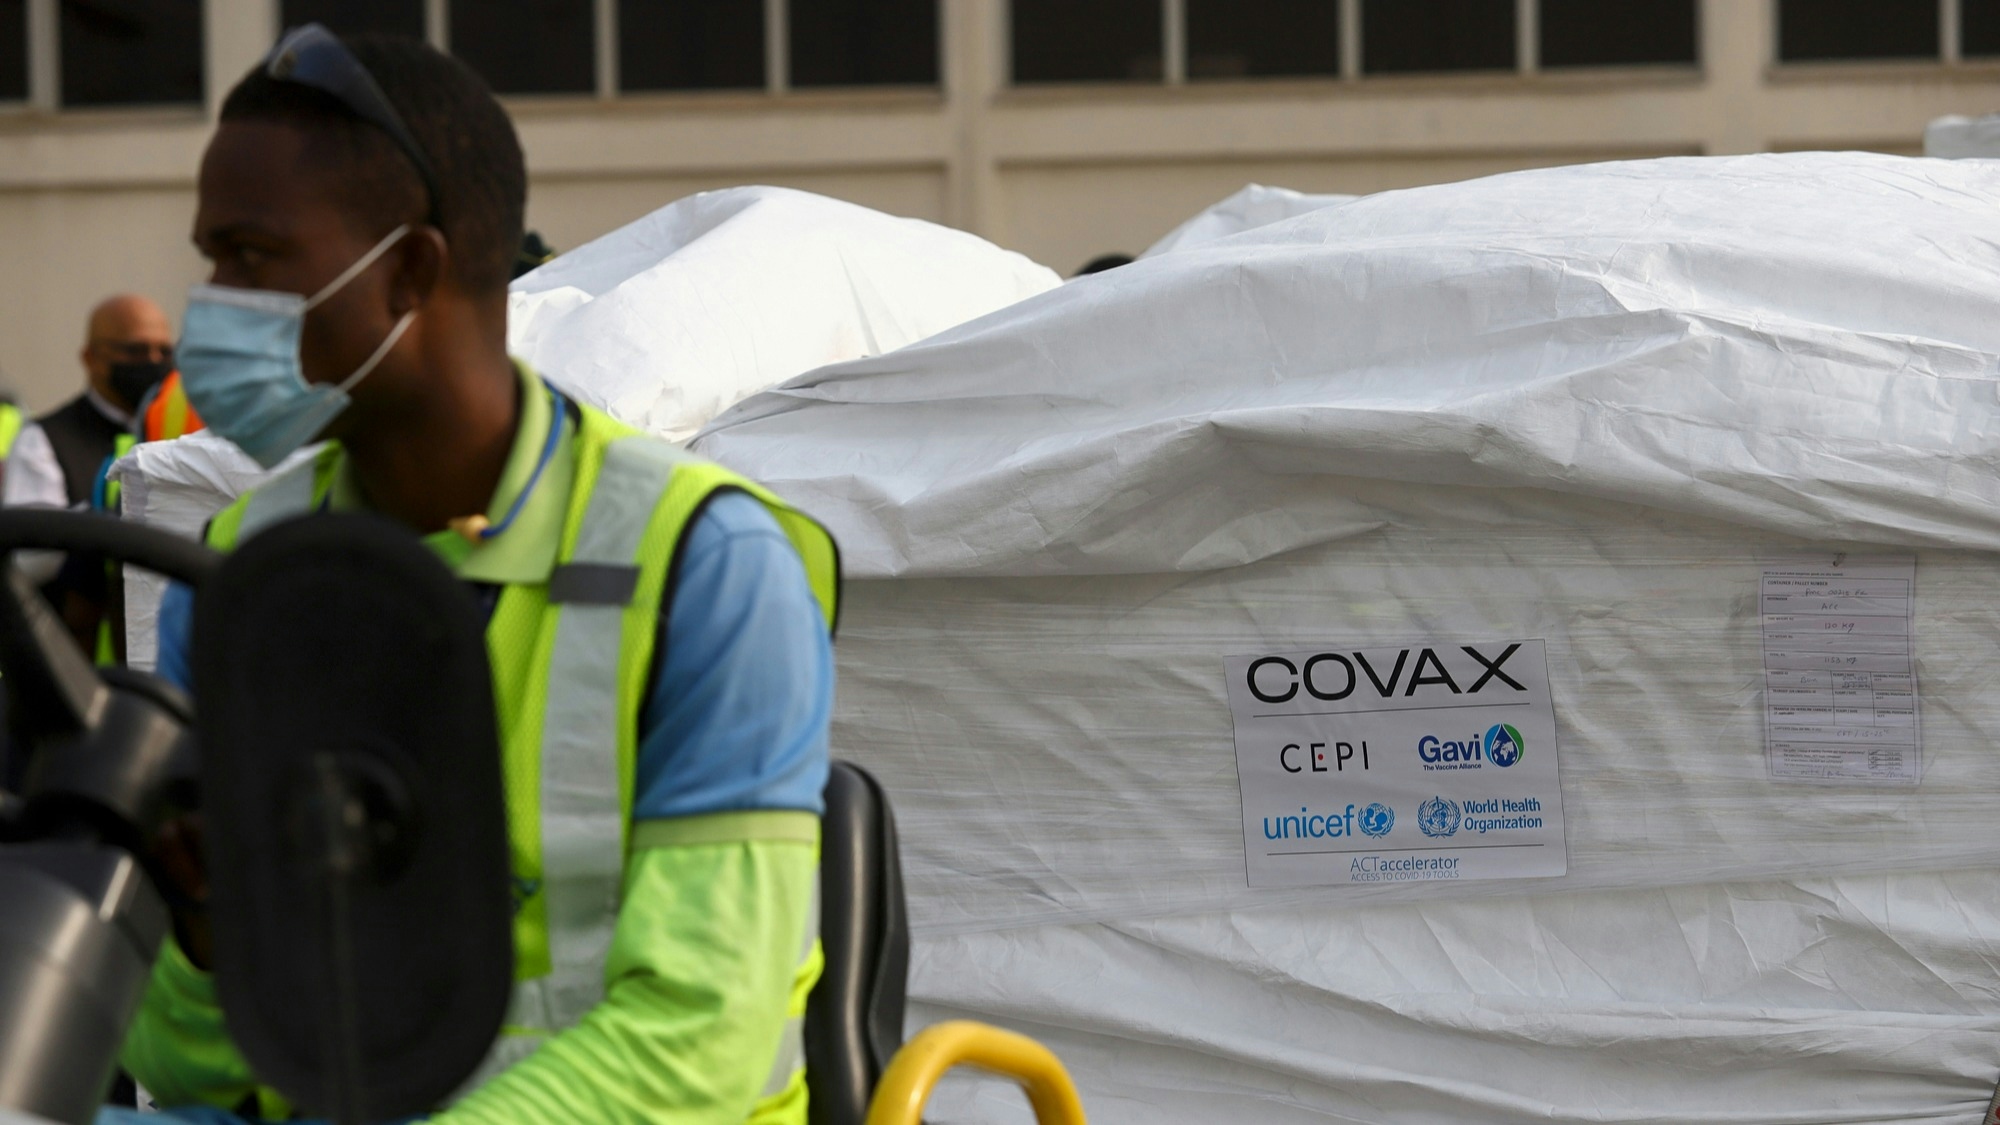 This photograph taken on February 24, 2021 shows a Covax tag on a shipment of Covid-19 vaccines from the Covax global Covid-19 vaccination programme, at the Kotoka International Airport in Accra.